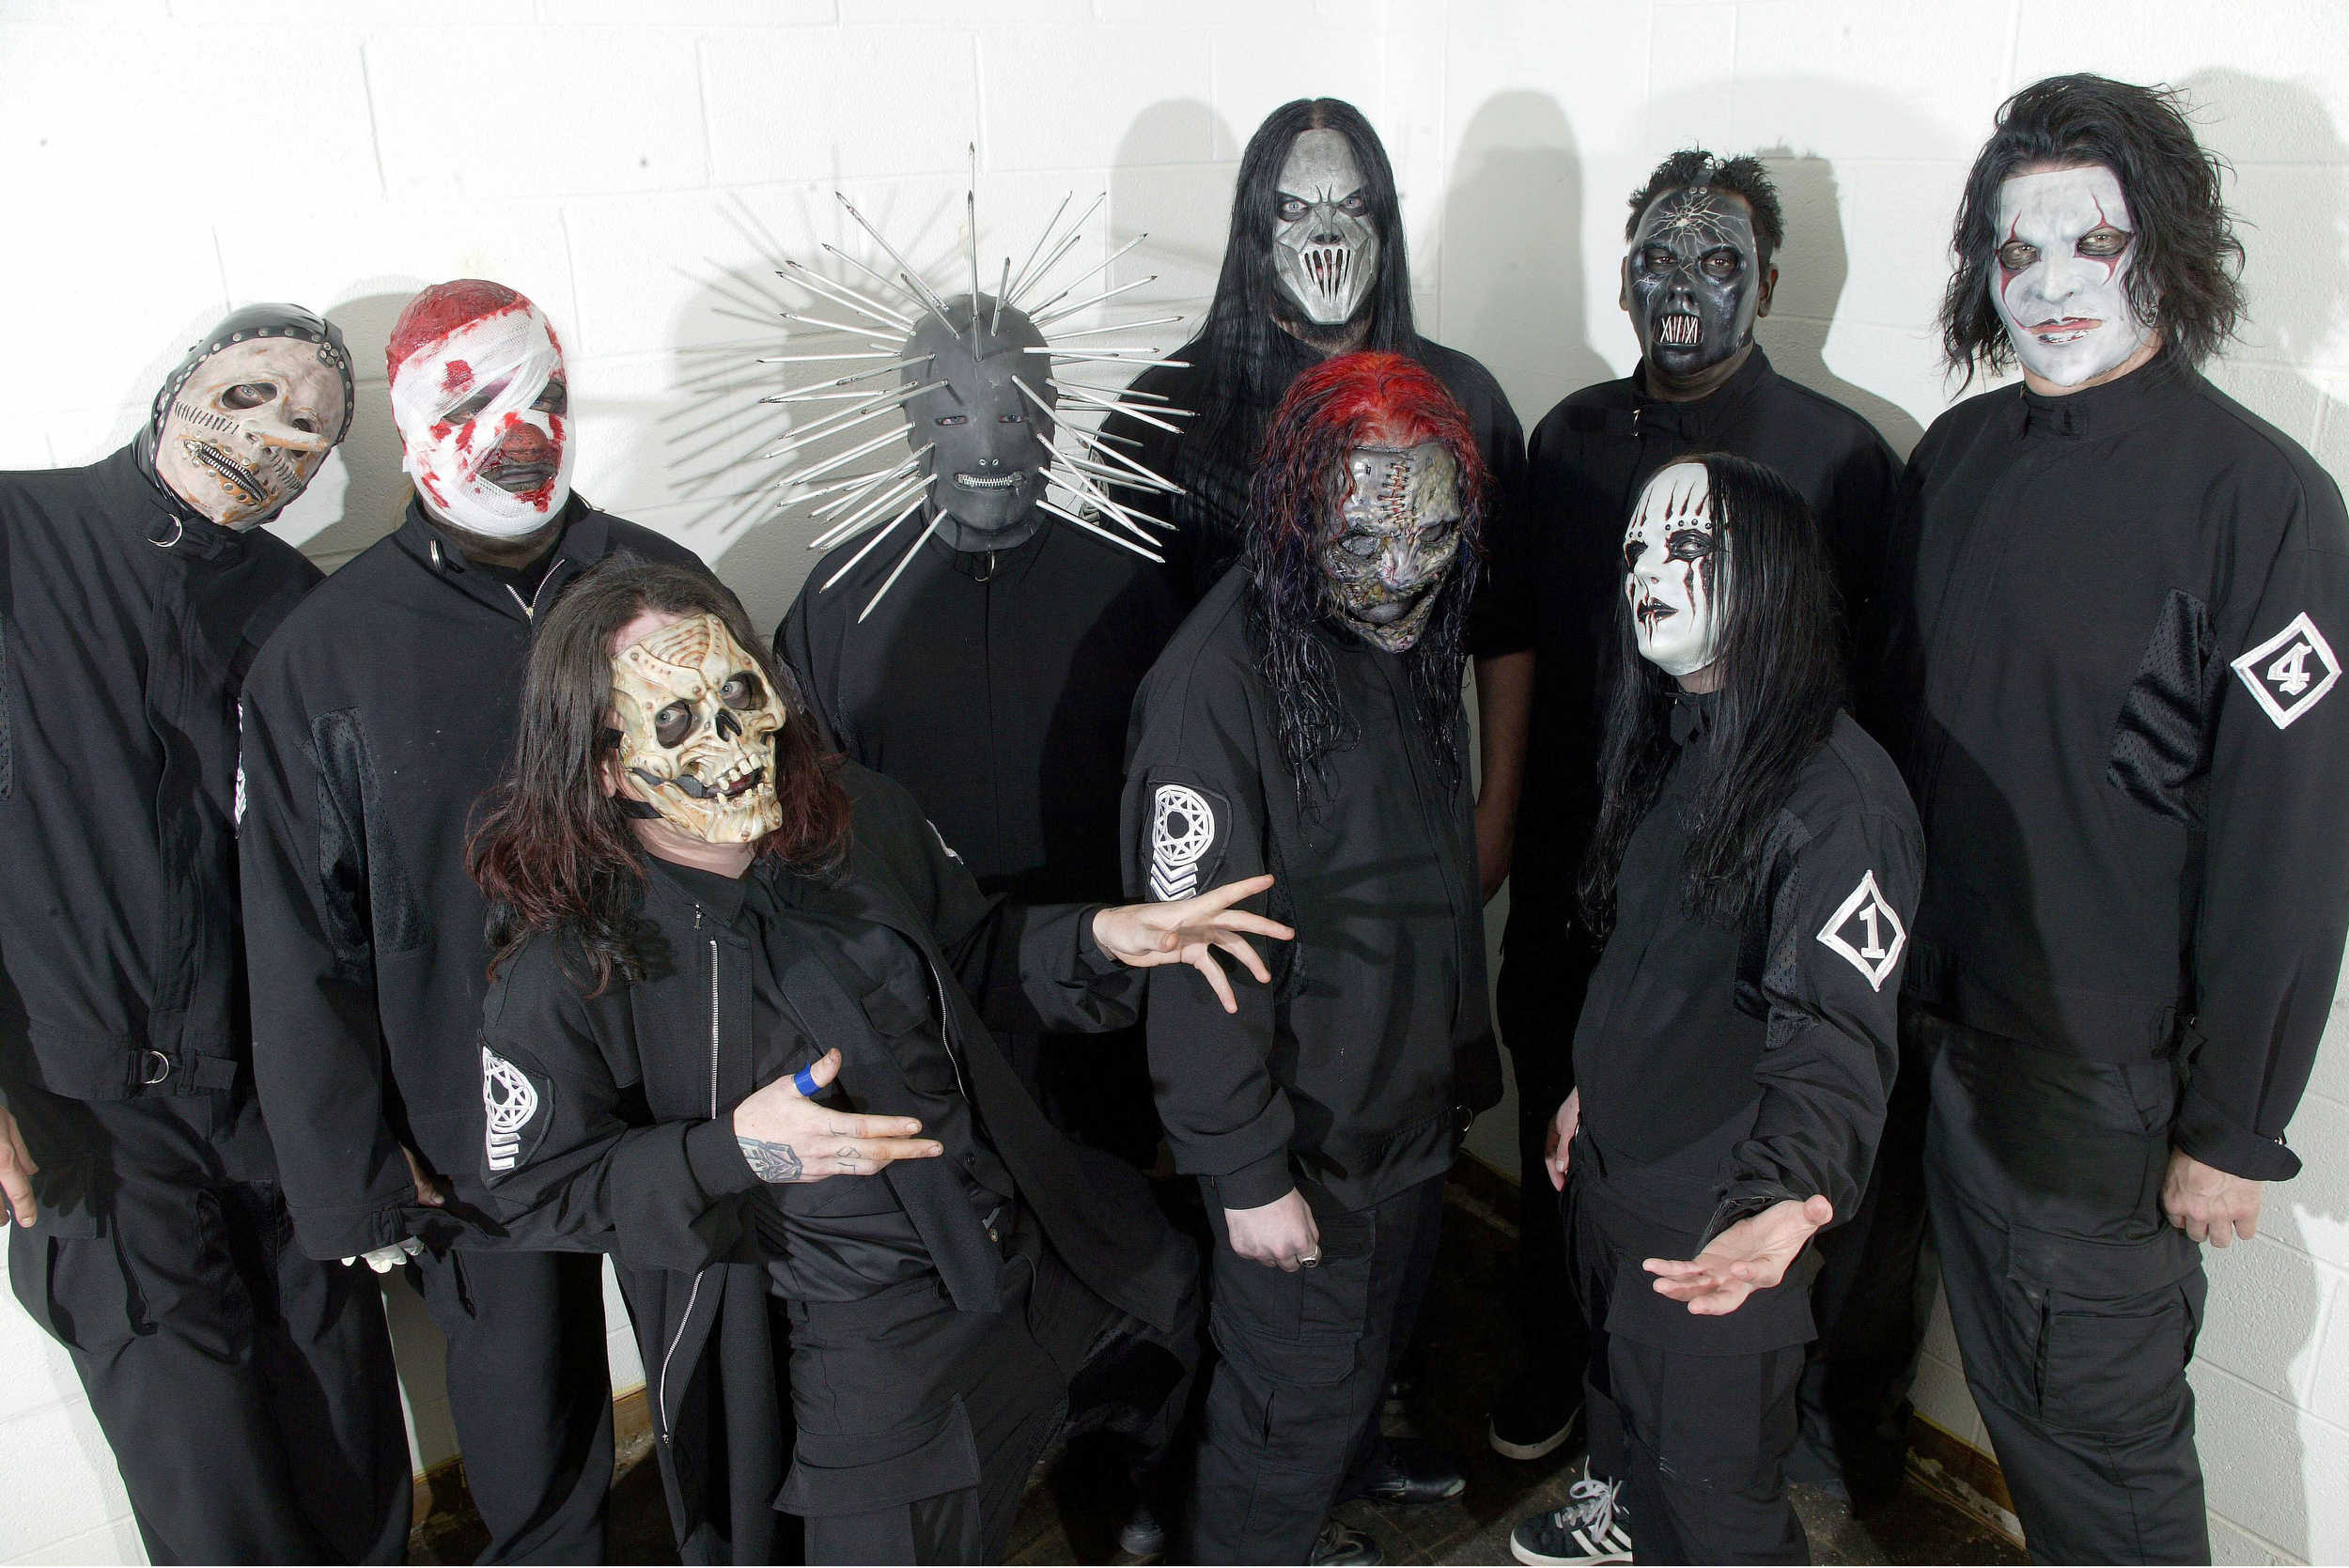 <p>Part of the nu metal sound that rose to prominence in the late 1990s and into the 2000s, Slipknot managed to separate itself from others in the genre by incorporating an aggressive sound, which also featured slick grooves. Experimental and conceptual creativity resulted in 10 Grammy nominations and one win. However, the band's mystique has usually drawn from <a href="https://www.youtube.com/watch?v=zJ0NveXhb6I">high-impact live shows and, of course, masked or painted-face band members</a>, who also sport jump suits. Some controversial lyrics — mostly violent in nature — and the tragic deaths of bass player Paul Gray and former drummer Joey Jordison have also added to the group's complex legacy.  </p><p><a href='https://www.msn.com/en-us/community/channel/vid-cj9pqbr0vn9in2b6ddcd8sfgpfq6x6utp44fssrv6mc2gtybw0us'>Follow us on MSN to see more of our exclusive entertainment content.</a></p>